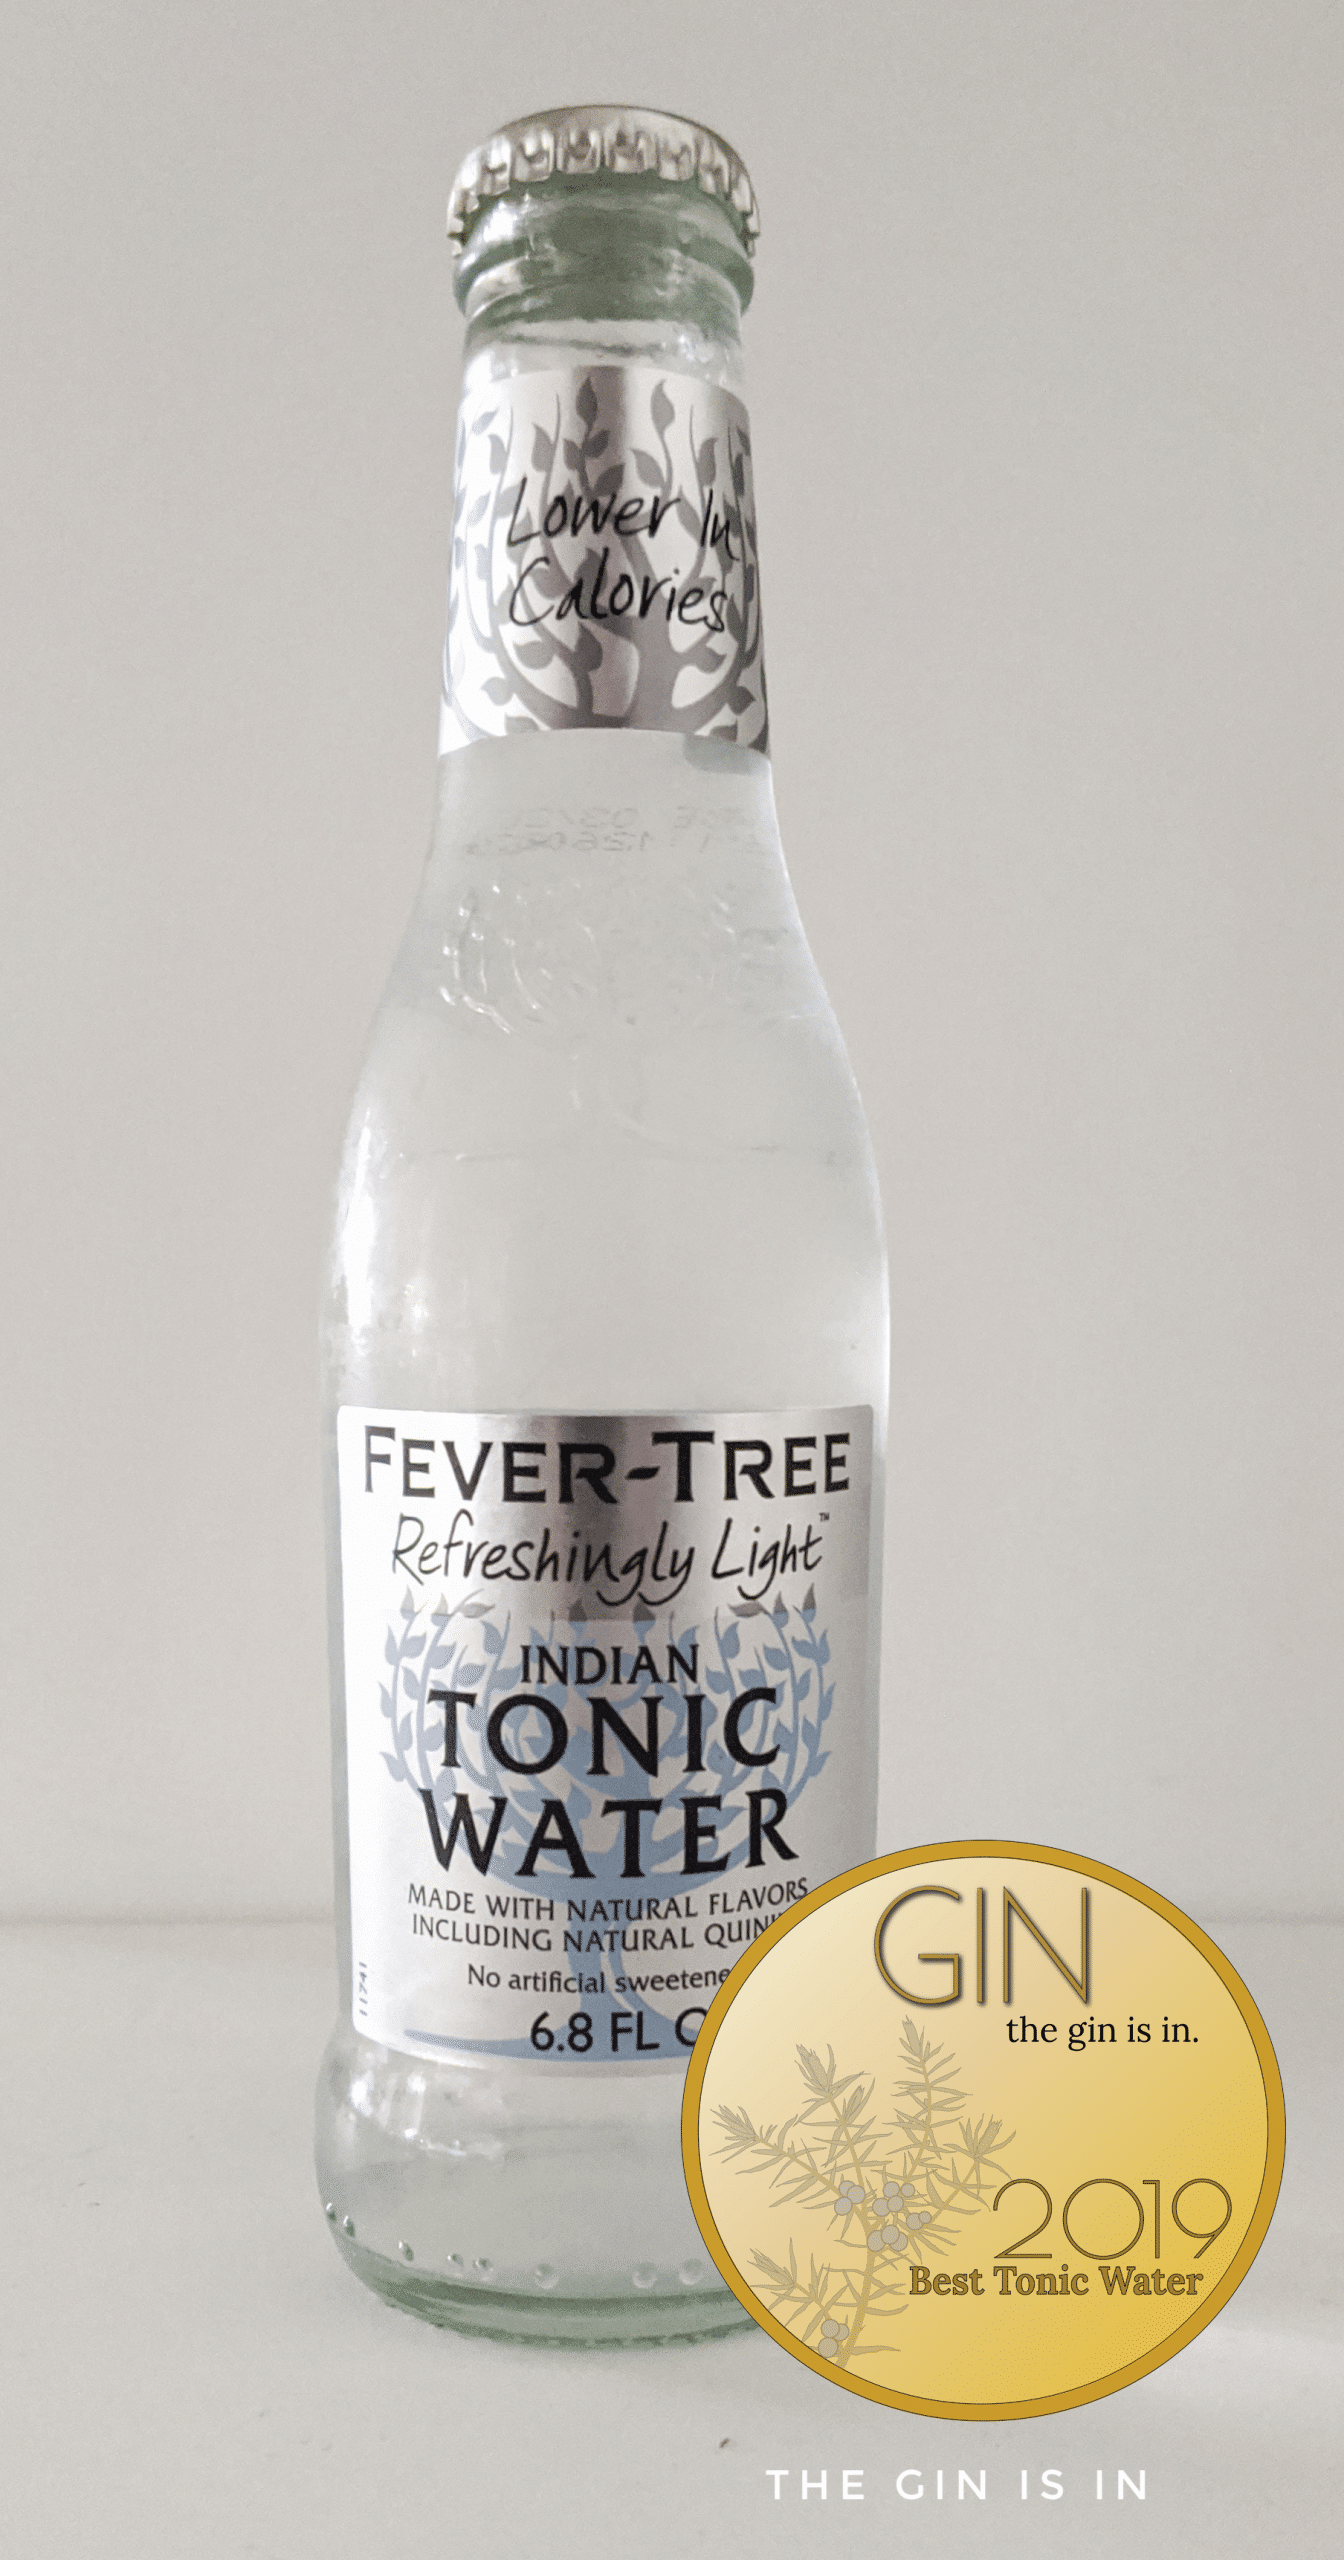 Bestes Tonic Water Für Gin 2019 Awards Auch Bester Tonic Sirup Bestes Rtd Home Healthcare